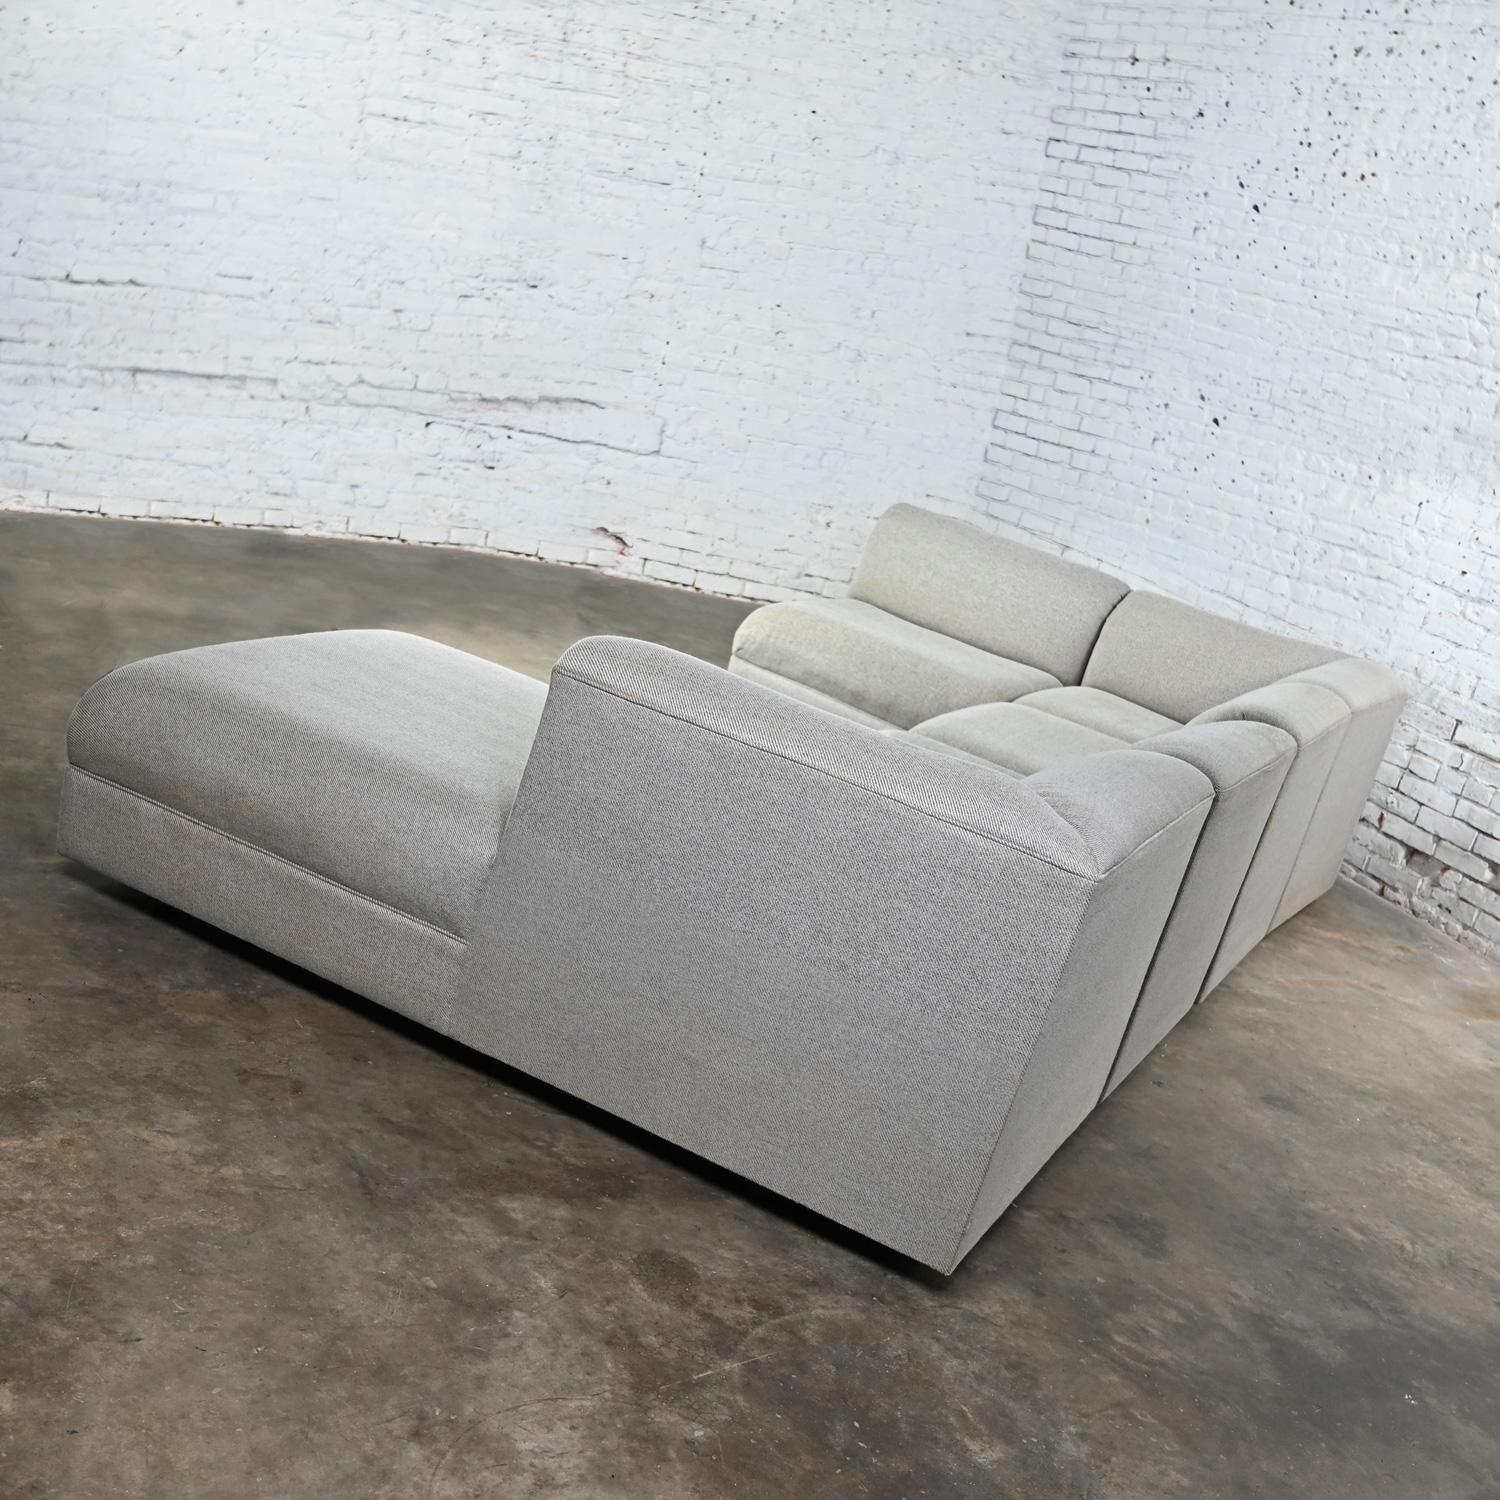 Late 20th Century Modern Modular Sectional Sofa 5 Pieces with Chaise Gray Tweed  For Sale 10